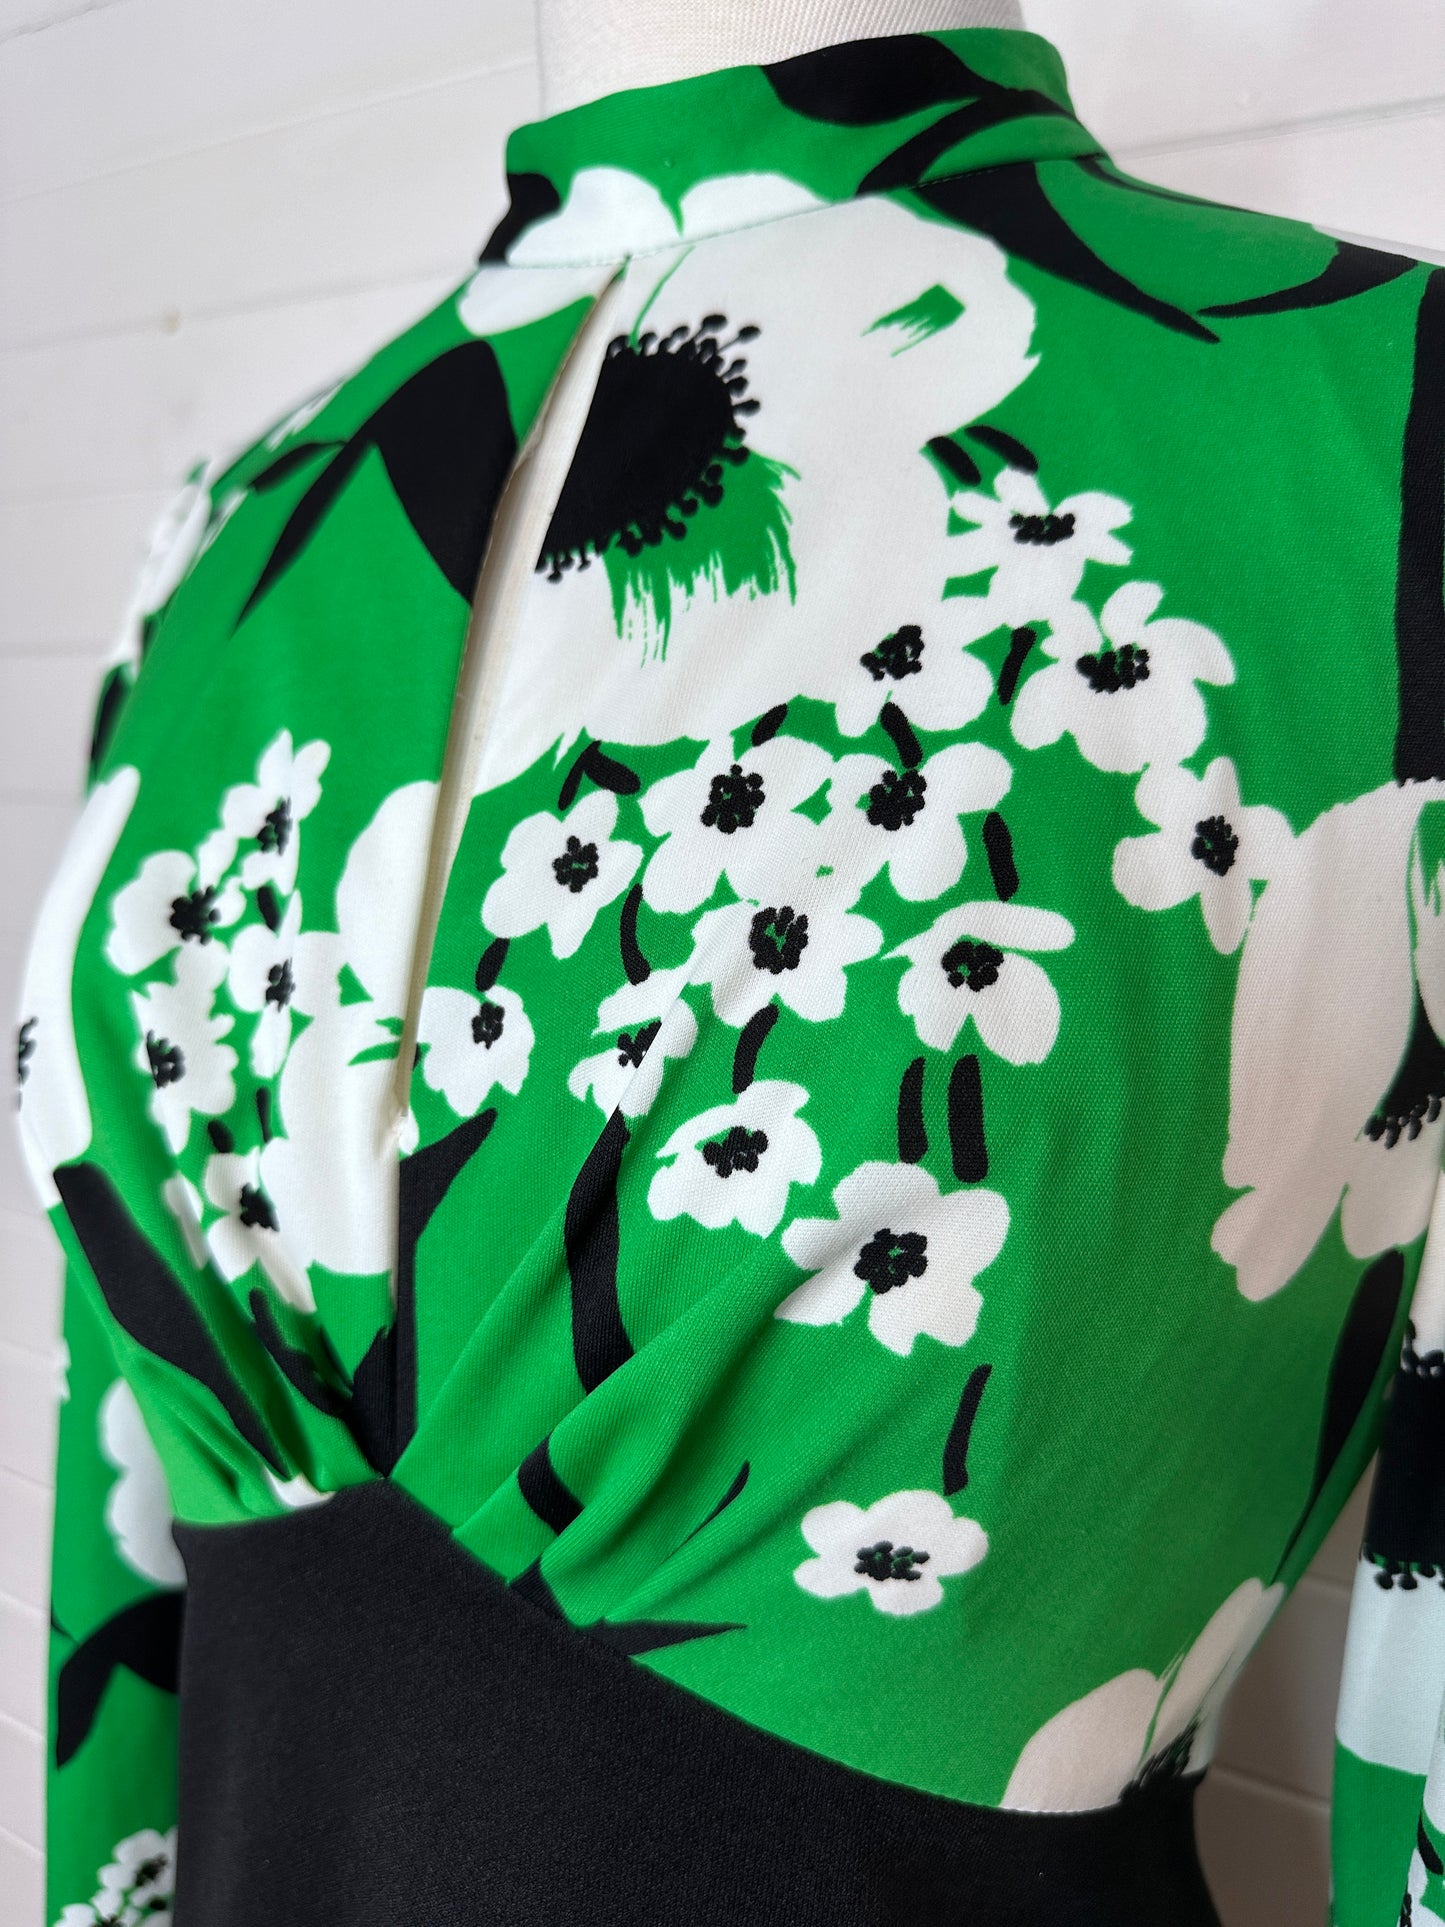 1970's Green Floral and Black Skirt Maxi Dress (M)